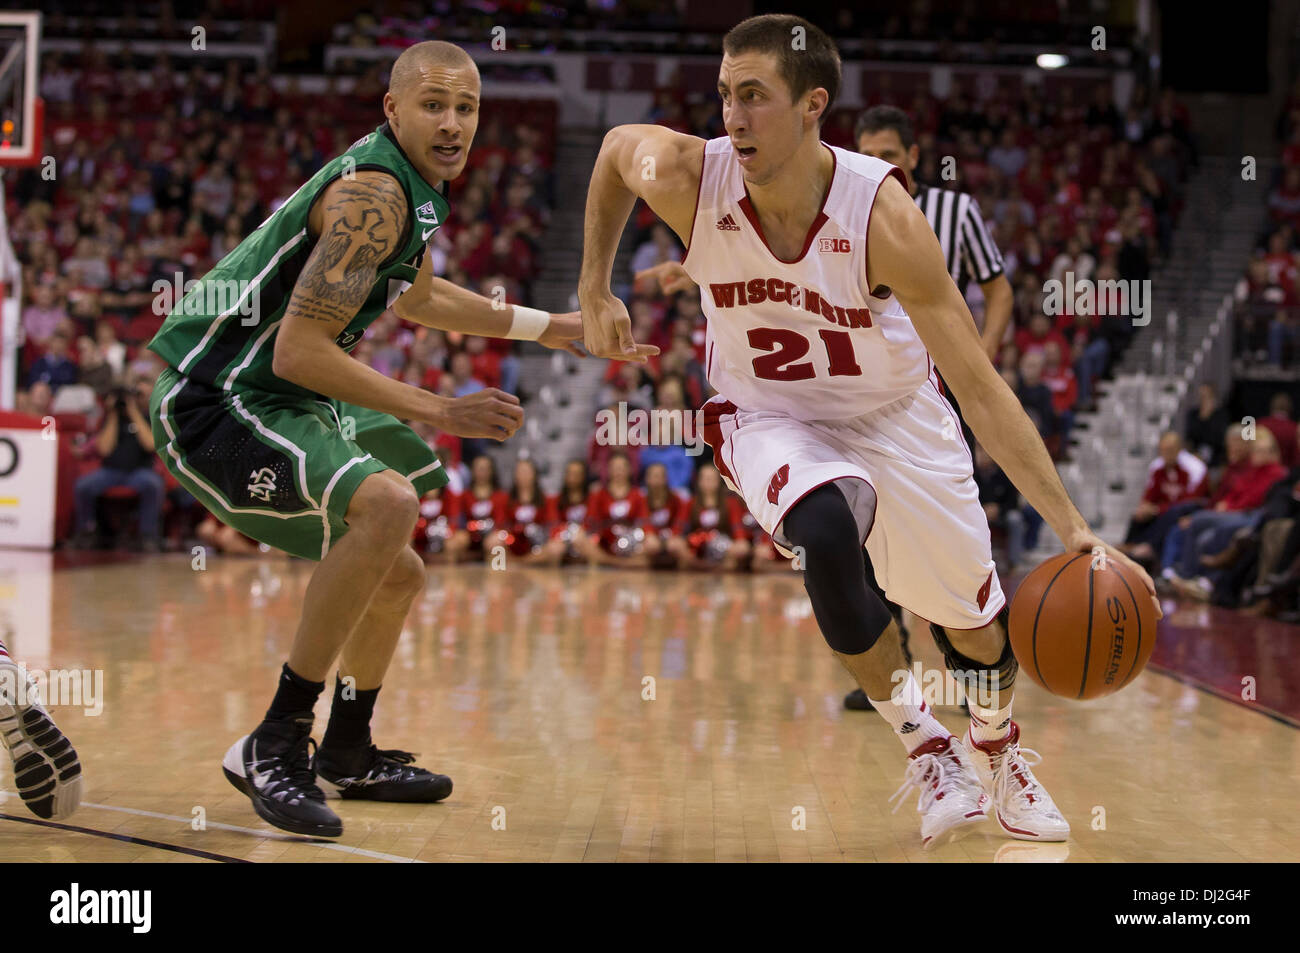 Madison, Wisconsin, USA. 19th Nov, 2013. November 19, 2013: Wisconsin Badgers guard Josh Gasser #21 dribbles past North Dakota Fighting Sioux guard/forward Troy Huff #5 on the way to the basket during the NCAA Basketball game between the North Dakota Fighting Sioux and the Wisconsin Badgers at the Kohl Center in Madison, WI. Wisconsin defeated North Dakota 103-85. John Fisher/CSM/Alamy Live News Stock Photo